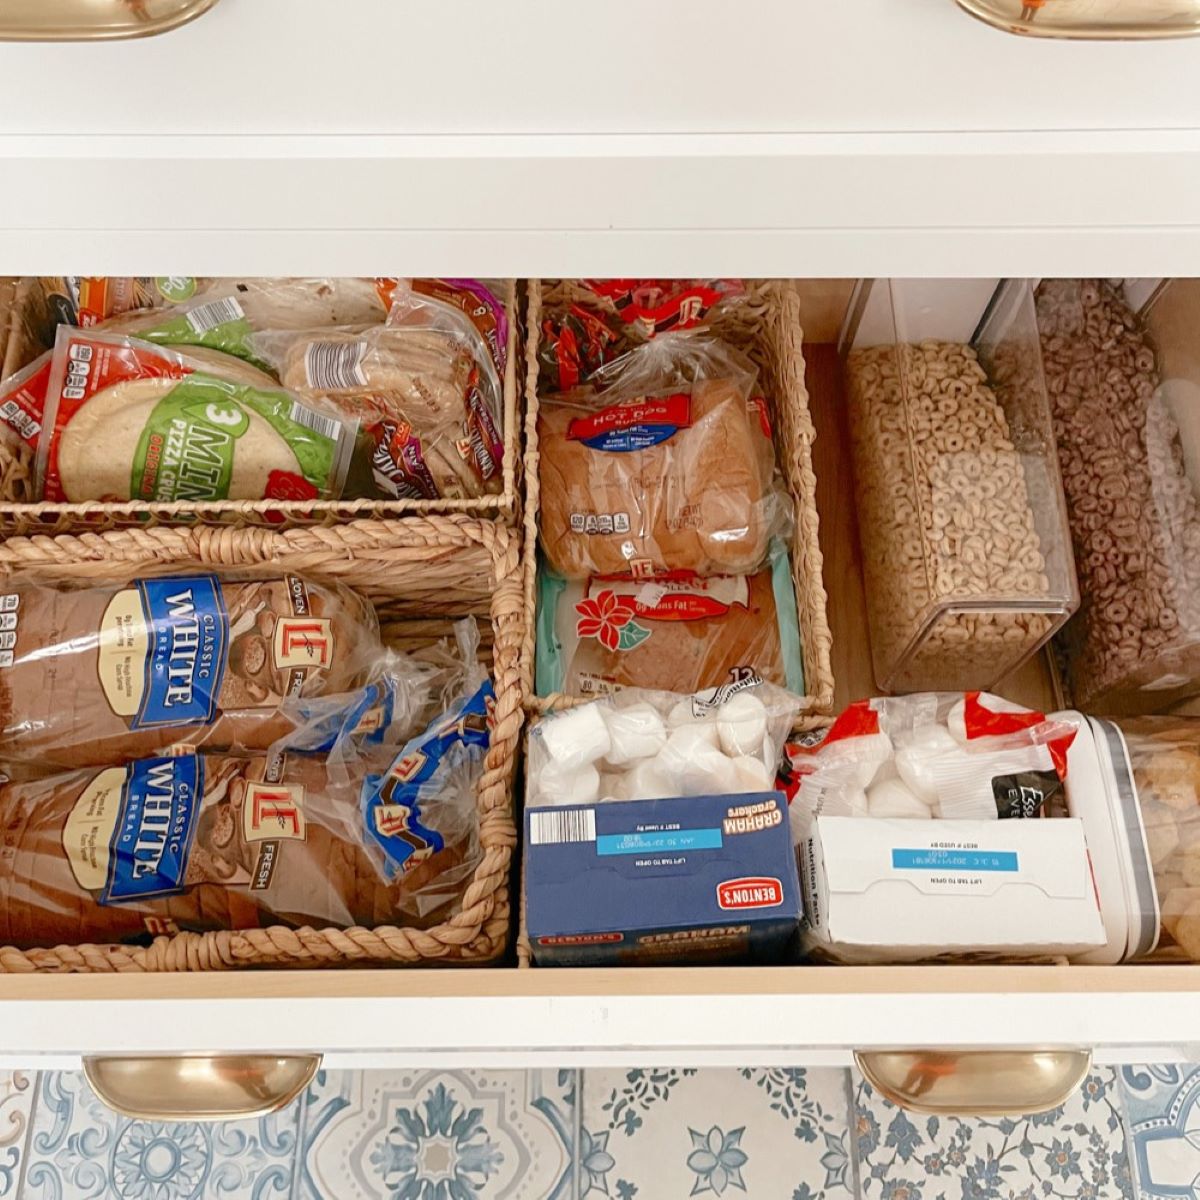 How To Store Bread In Pantry